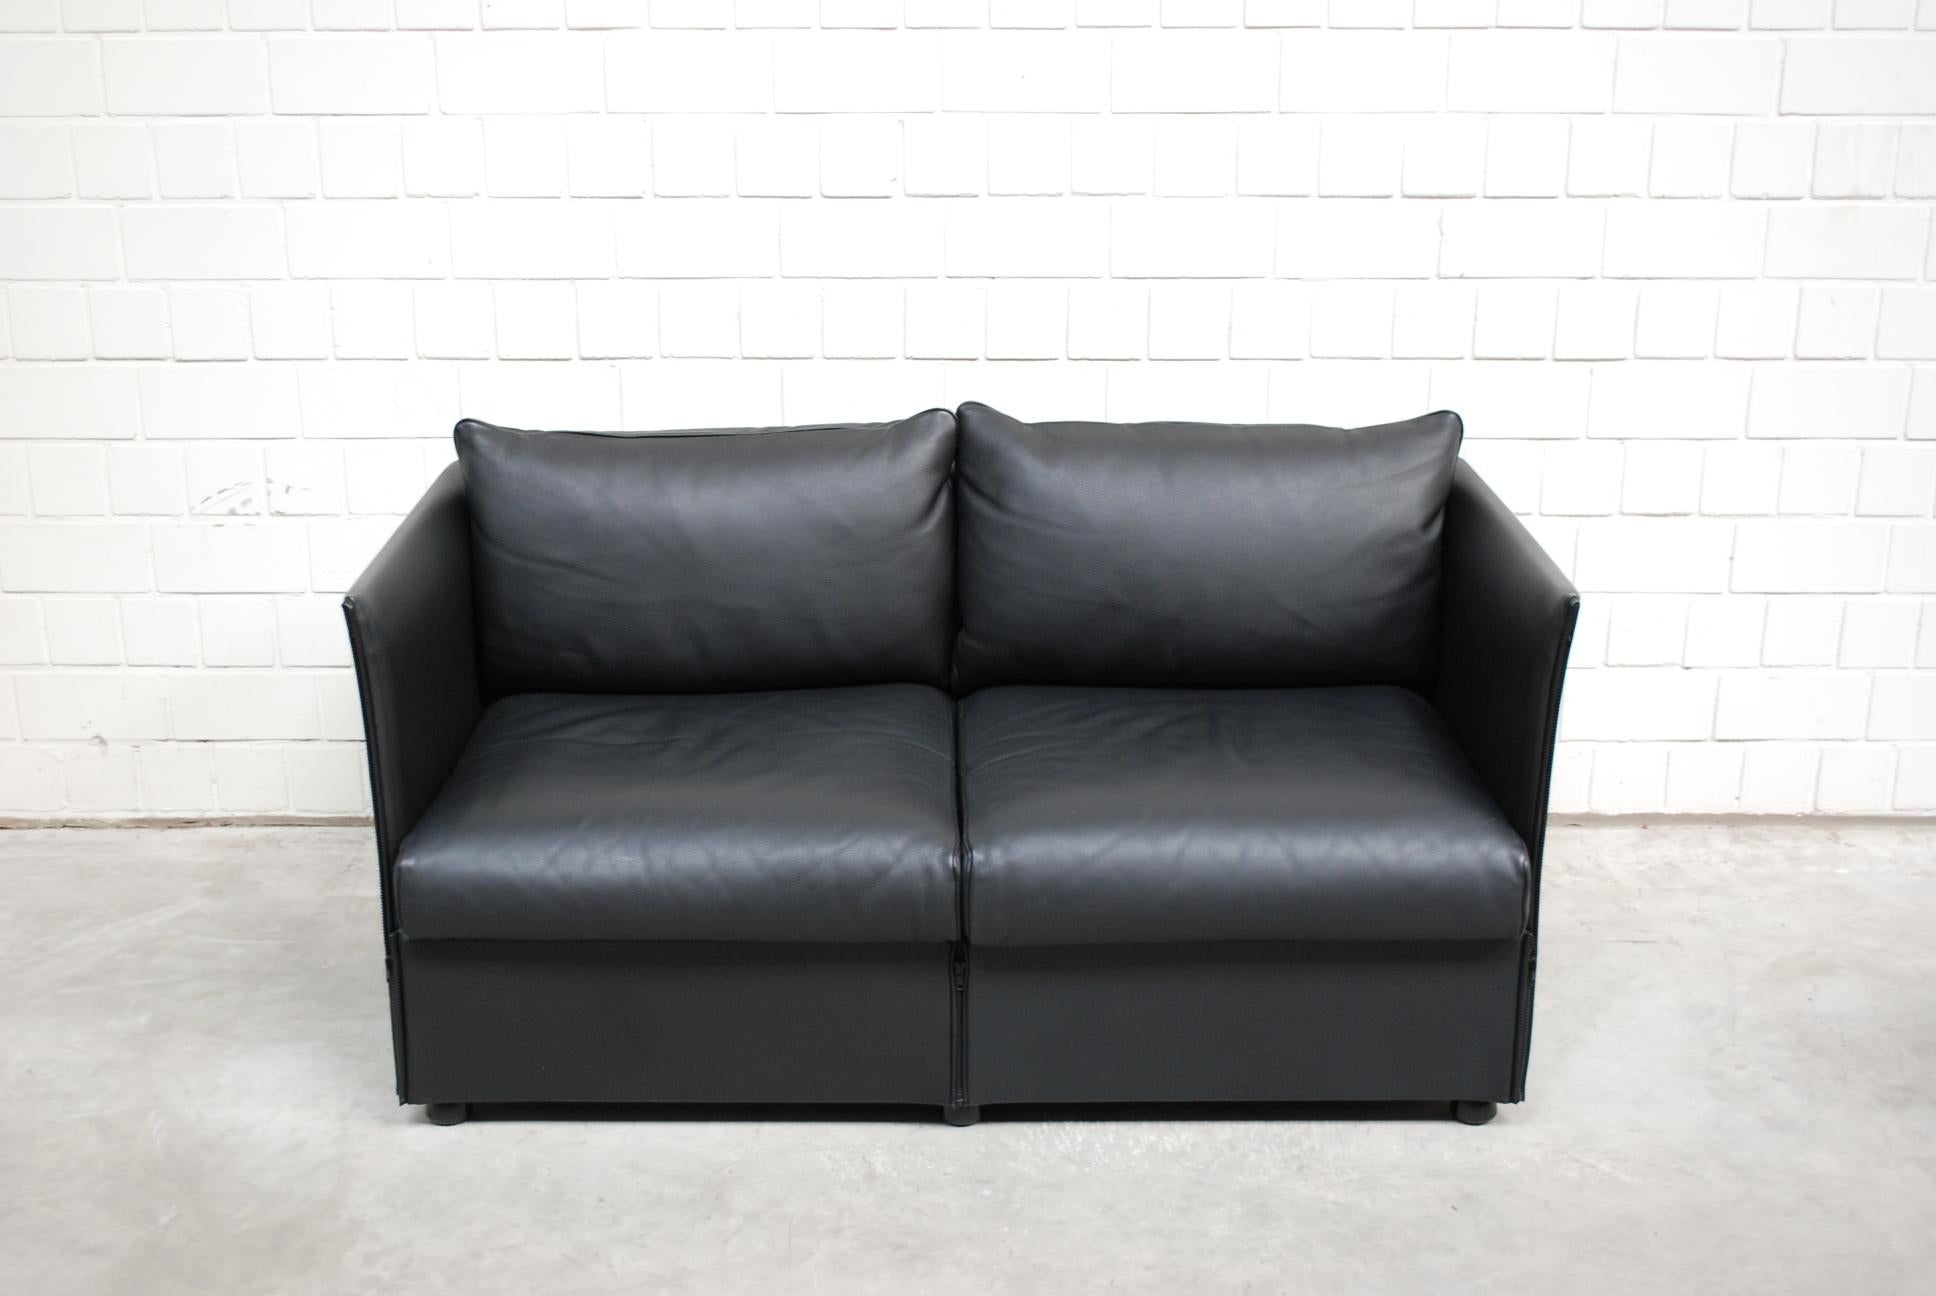 Model Landeau sofa designed by Mario Bellini and produced by Cassina in 1976. 
It features a steel frame with black leather upholstery and a zip design.